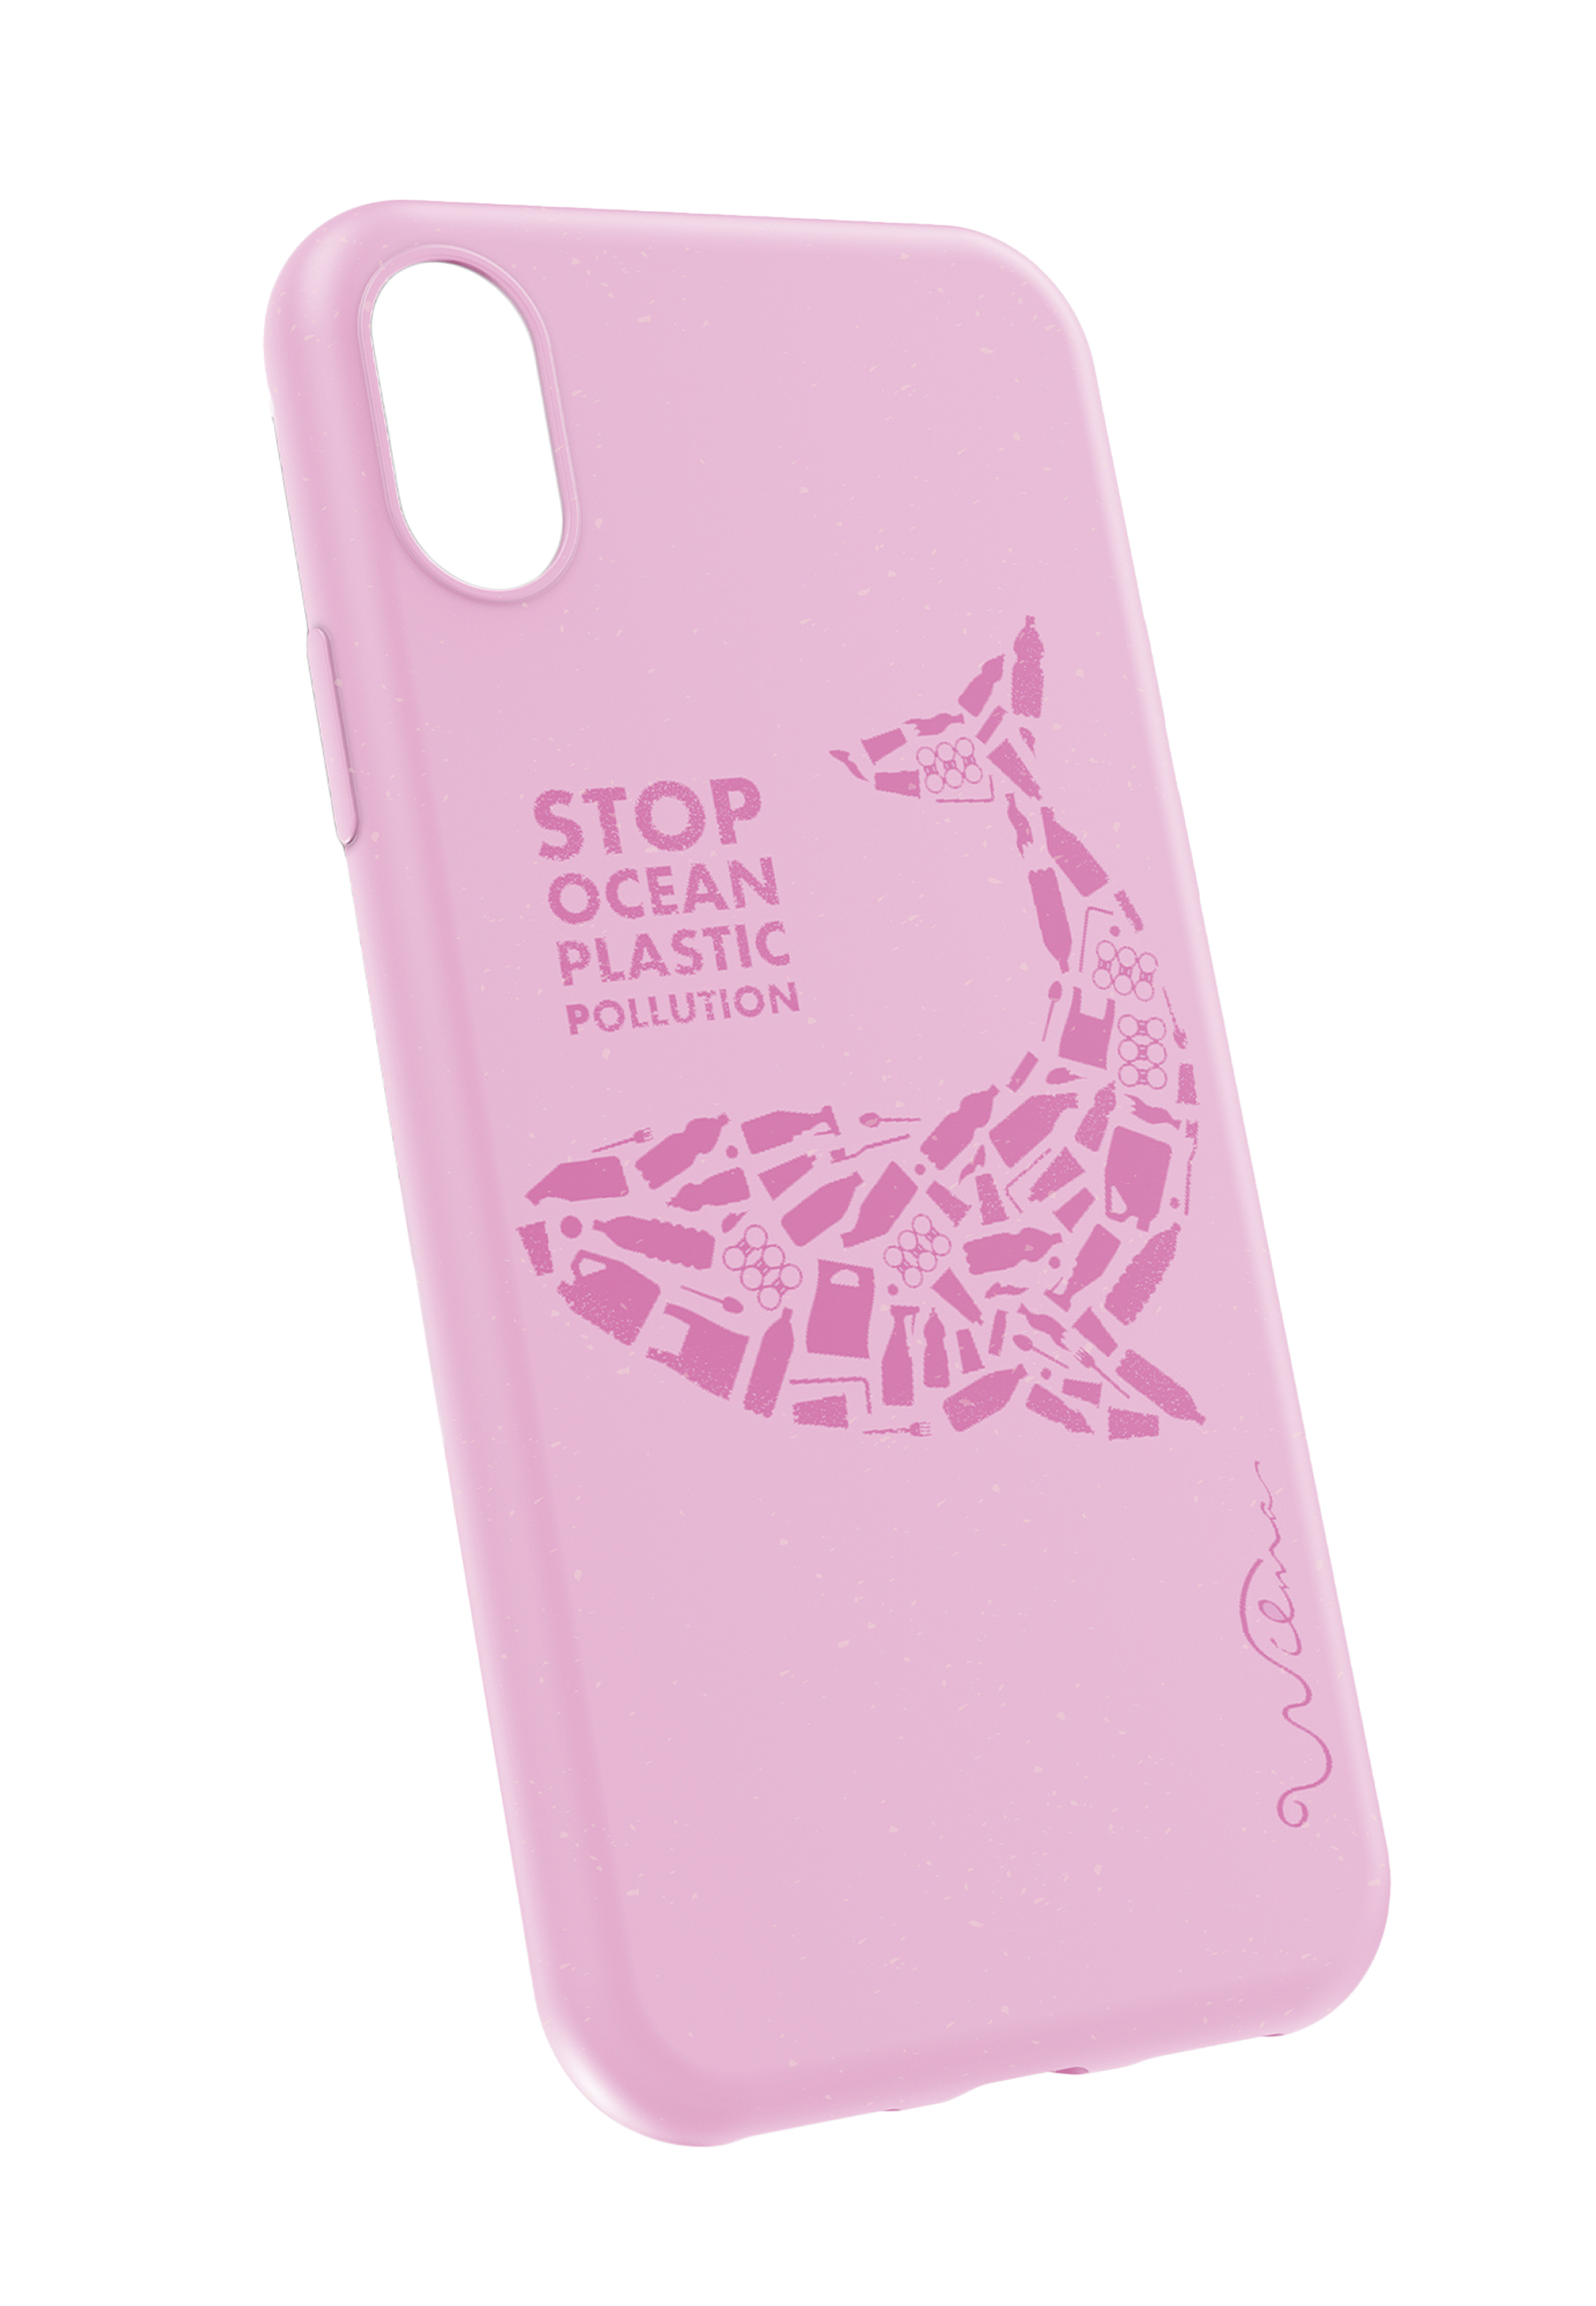 ECO FASHION BY WILMA X/XS, Apple, Backcover, RIPXS, pink iPhone